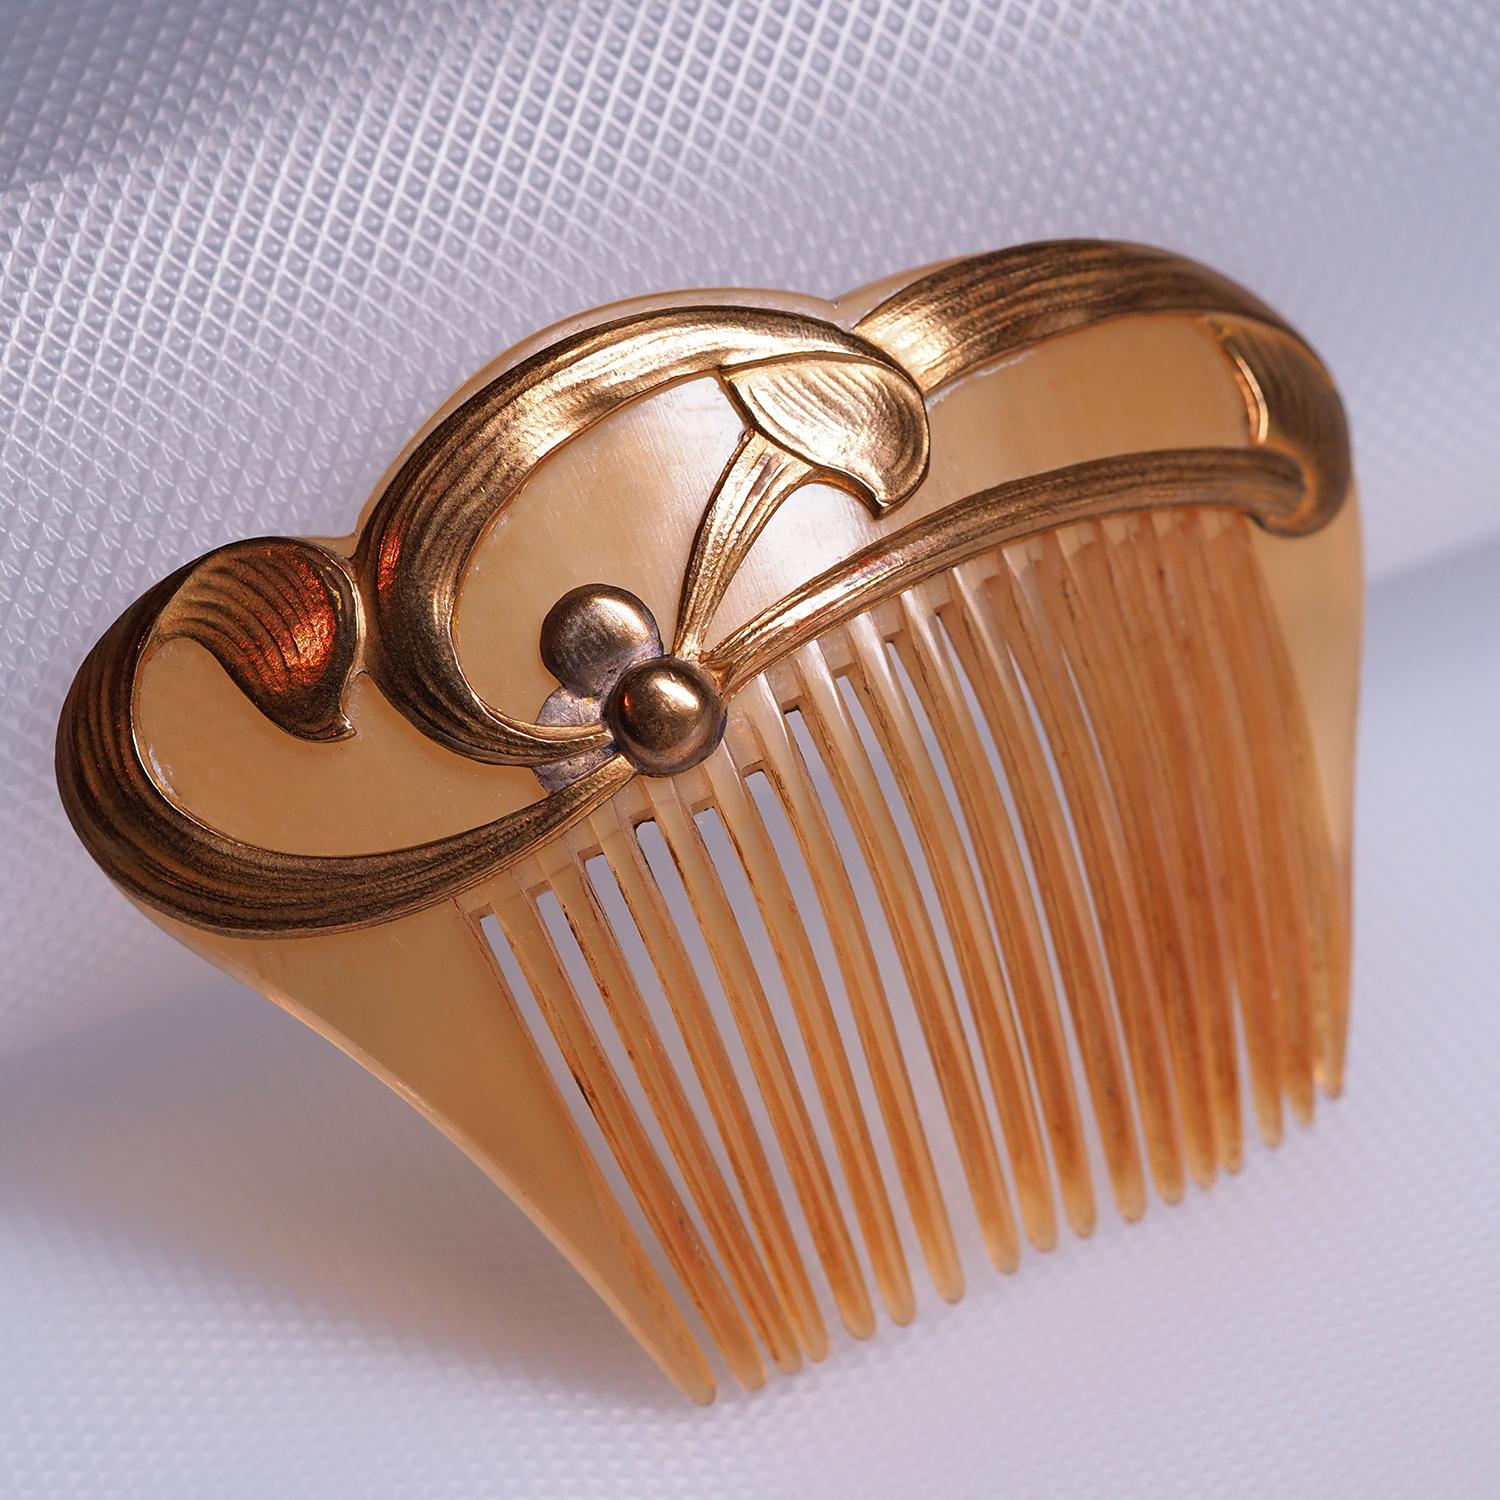 Art Nouveau mistletoe leaves antique horn hair comb in excellent condition by Beaudouin.

Width : 78 mm / 3.07 in

Height : 60 mm / 2.36 in

Depth : 6 mm / 0.24 in

Weight: 17.11 grams 

The mistletoe leaves are one of emblematics for the French Art